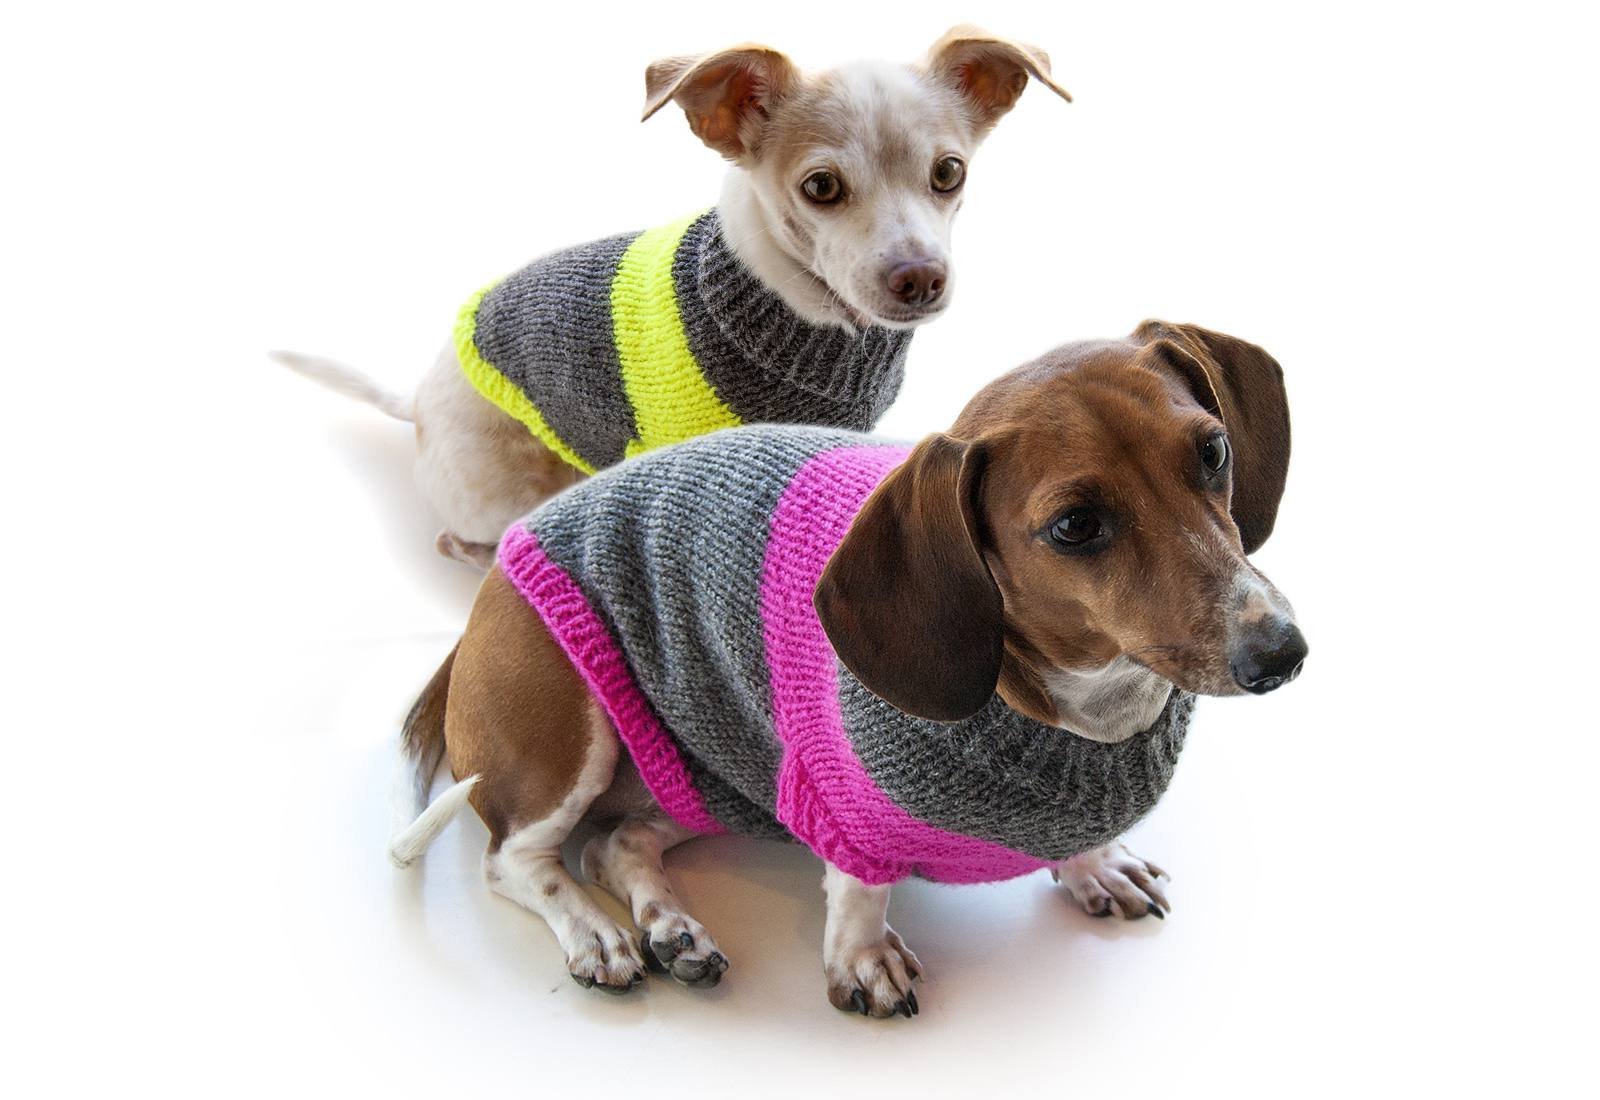 Knitting Patterns Dog Coats 12 Dog Sweaters And Other Knitting Patterns For Pups